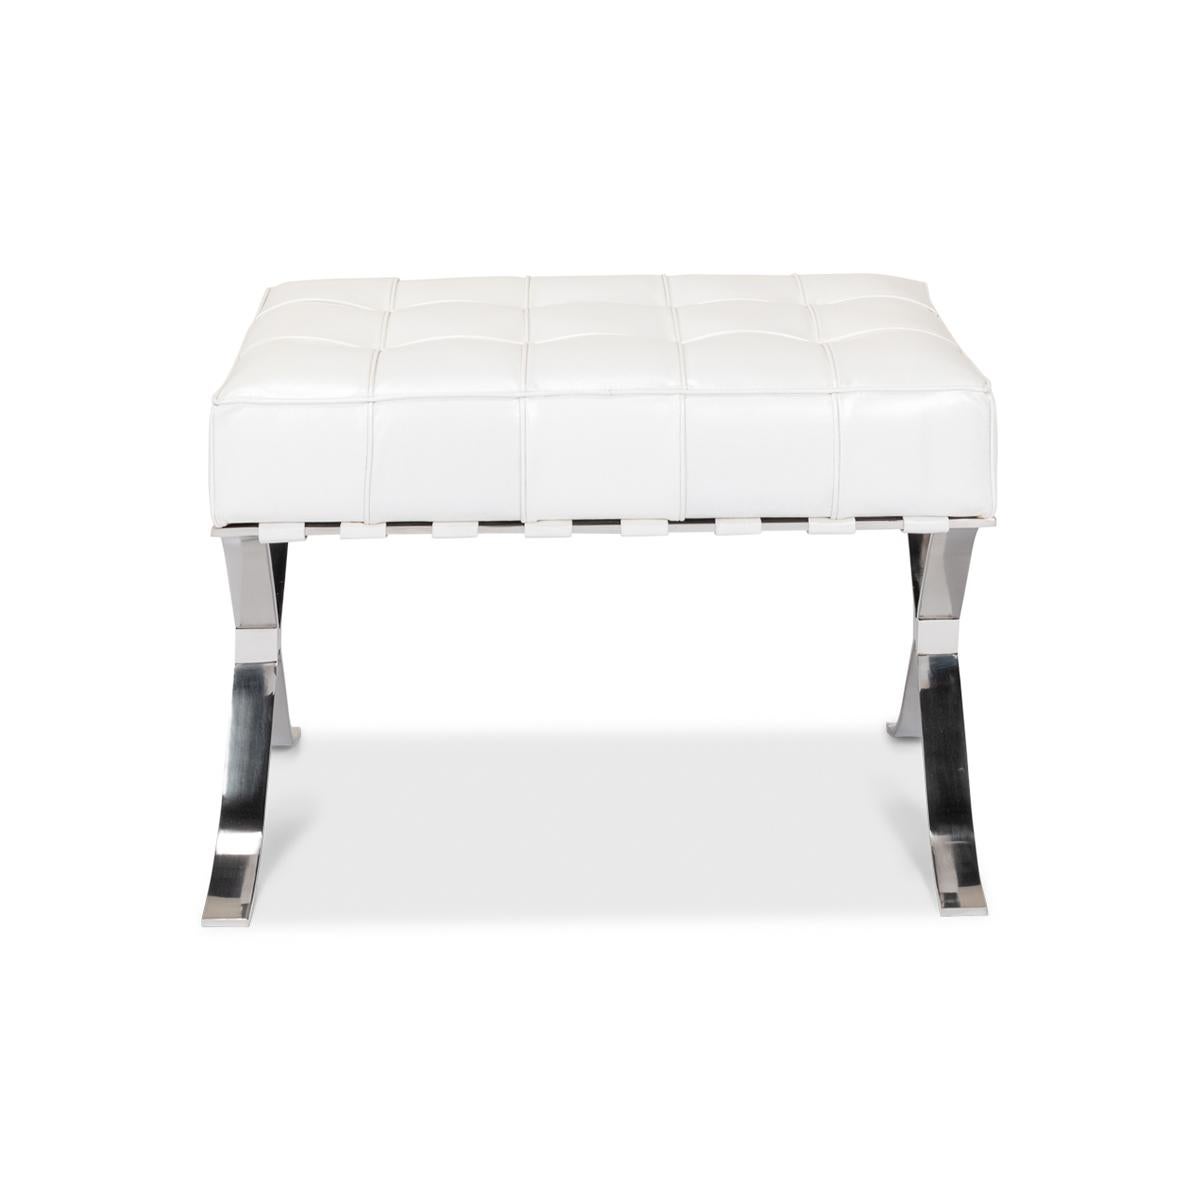 This sleek and modern short bench combines luxury with a minimalist design, perfect for adding a touch of elegance to any interior space. The stool features a high-quality, white tufted leather cushion that exudes comfort and sophistication. The